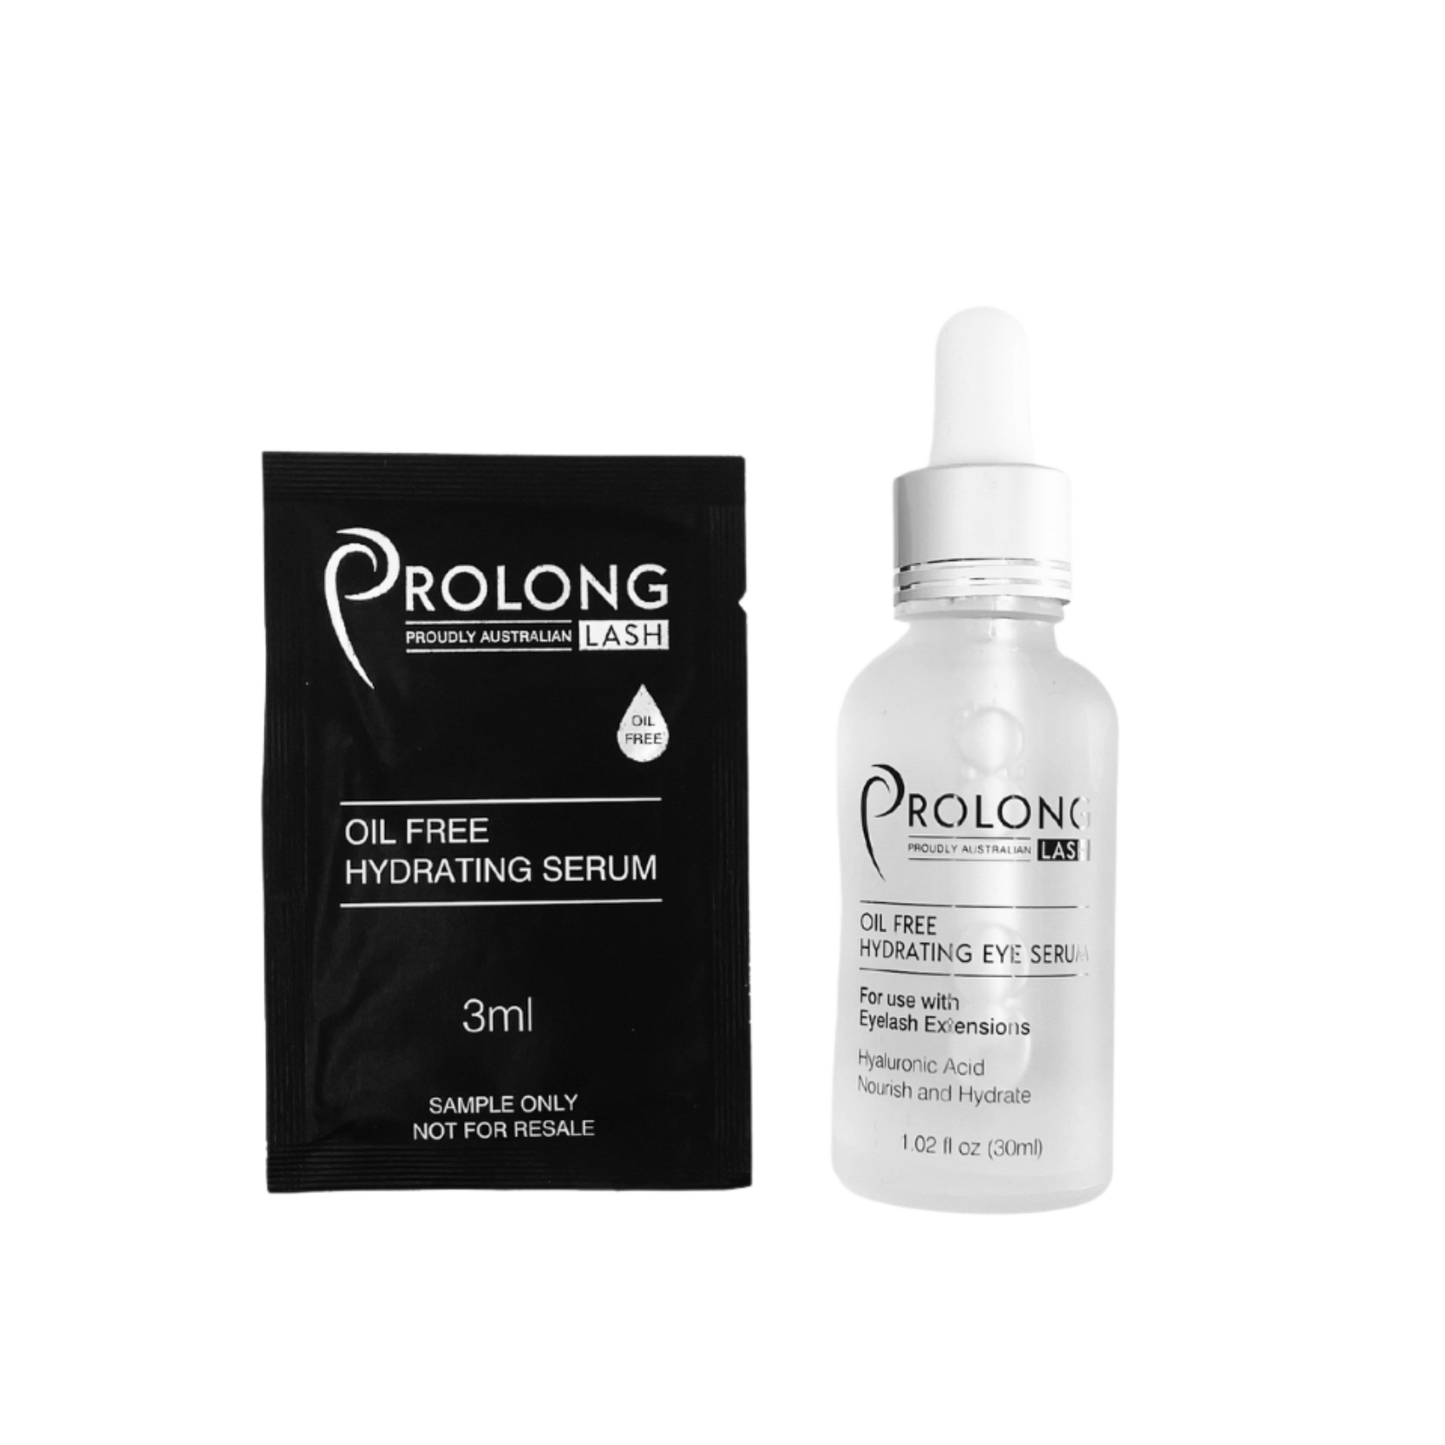 3ml Prolong Lash Under Eye Hydrating Serum sample packet and 30ml glass bottle with dropper